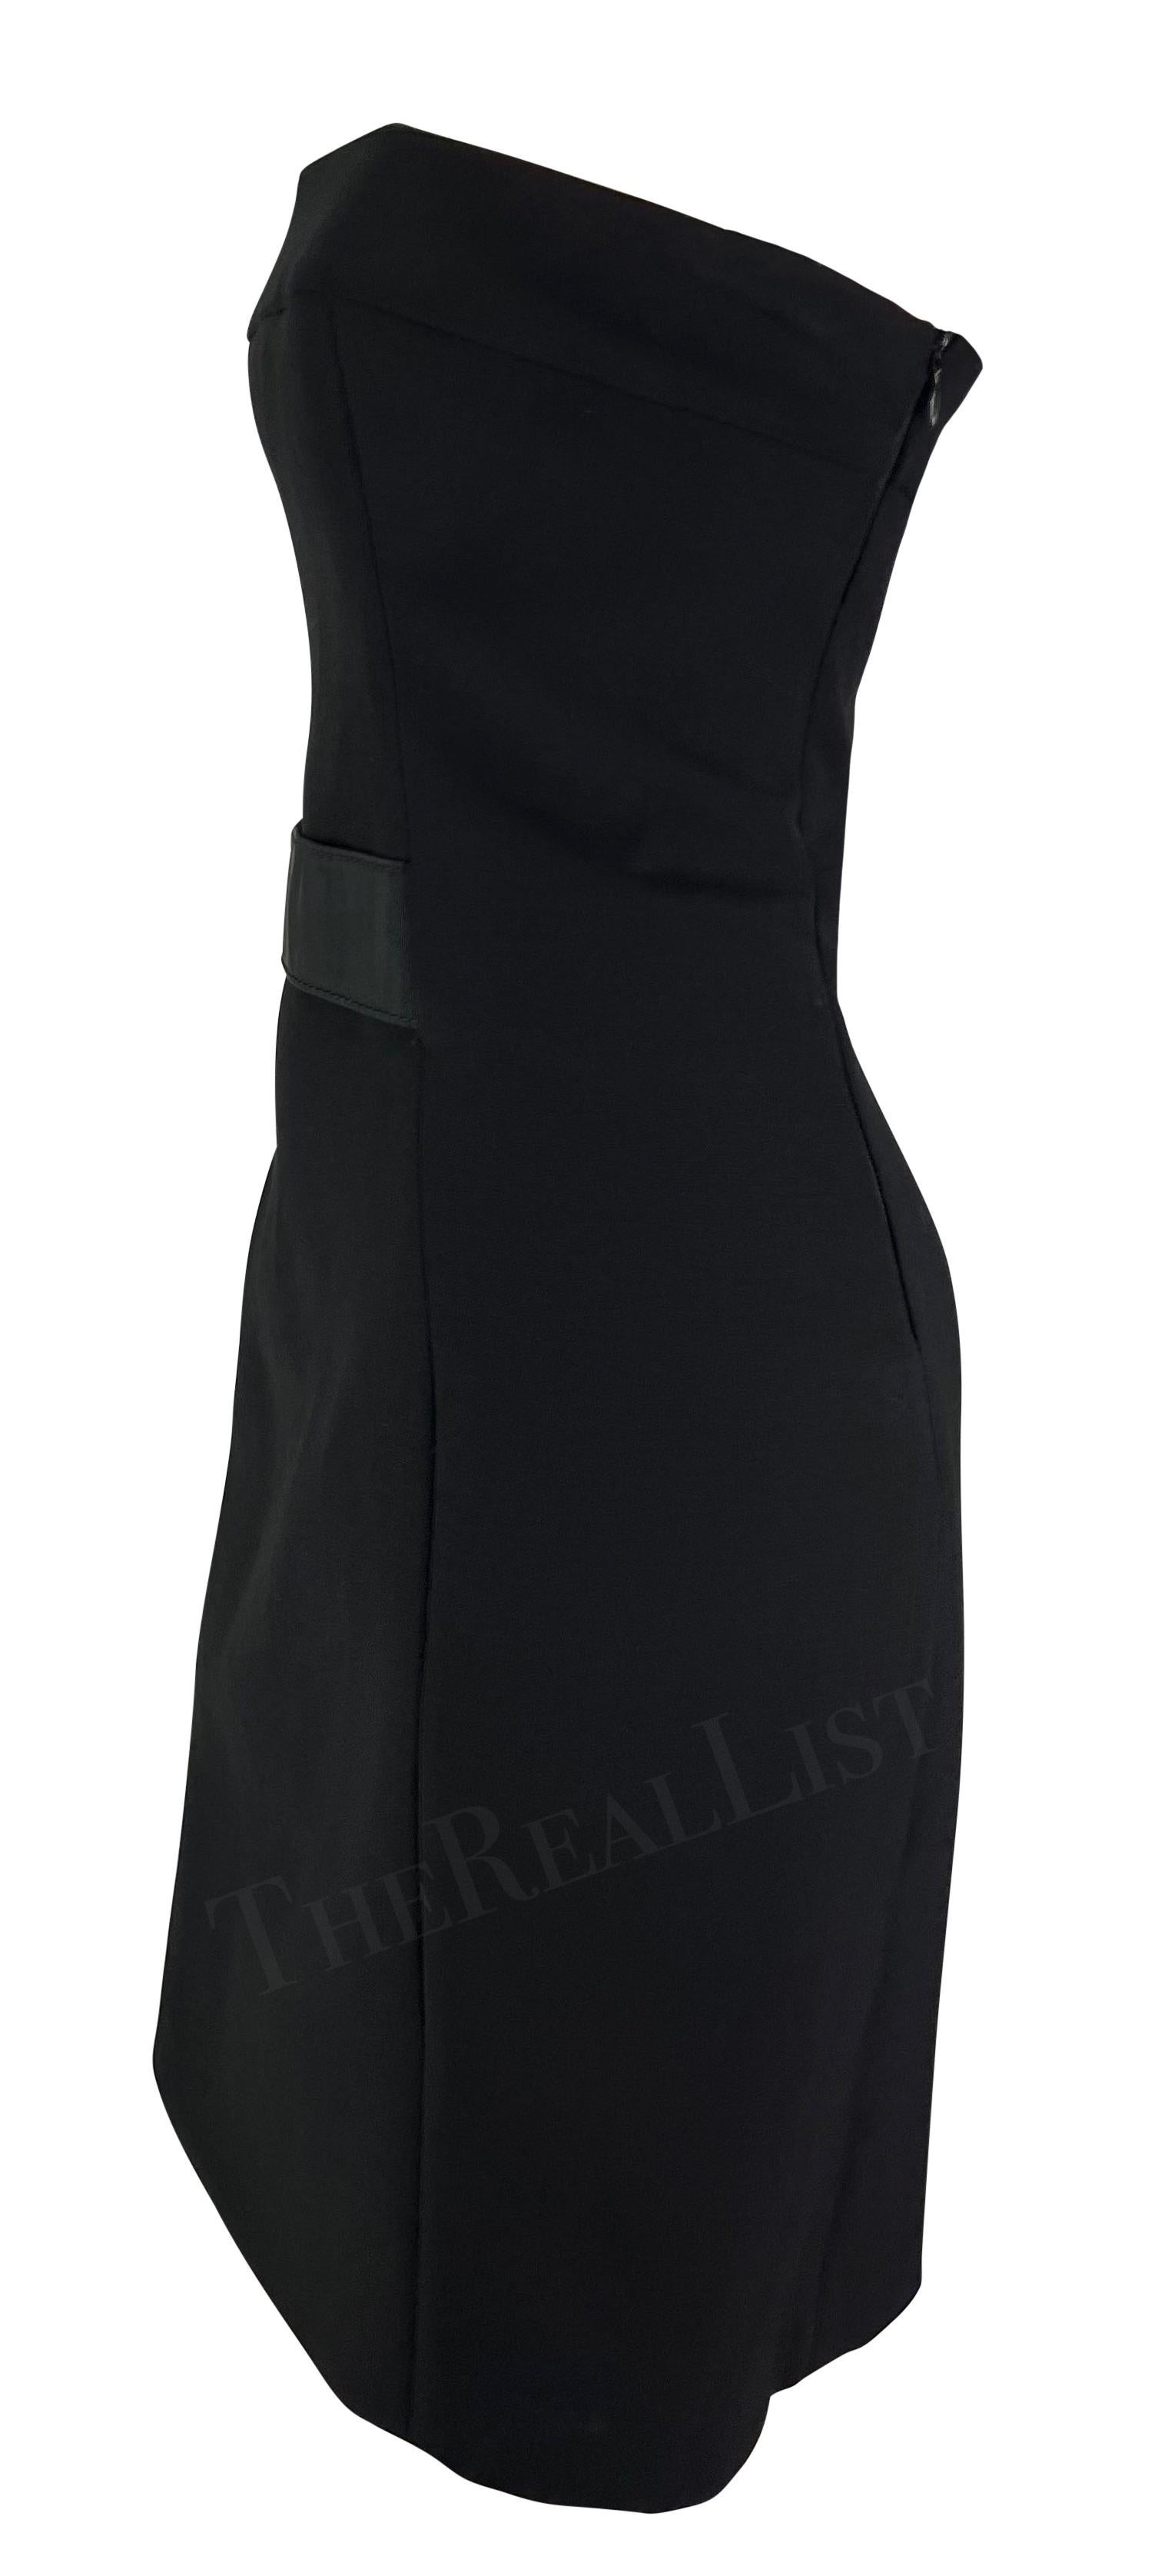 Presenting a black strapless Gucci dress, designed by Tom Ford. From the Fall/Winter 2001 collection, this strapless wool dress features a small strap accent across the waist. This fitted Gucci by Tom Ford mini dress is the perfect elevated addition